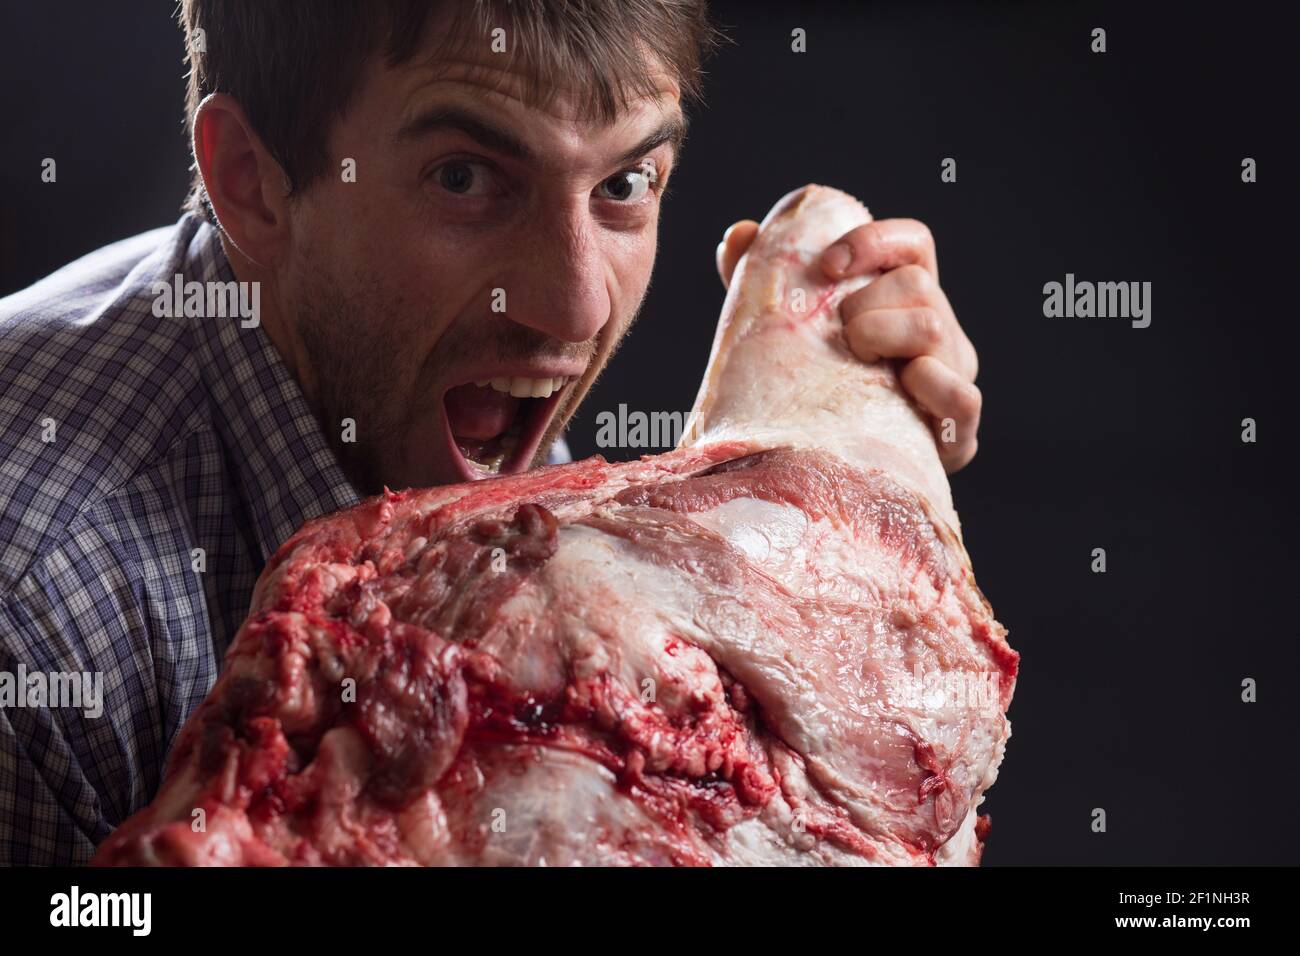 Crazy hungry man eating raw pork leg with crazy angry face. Stock Photo